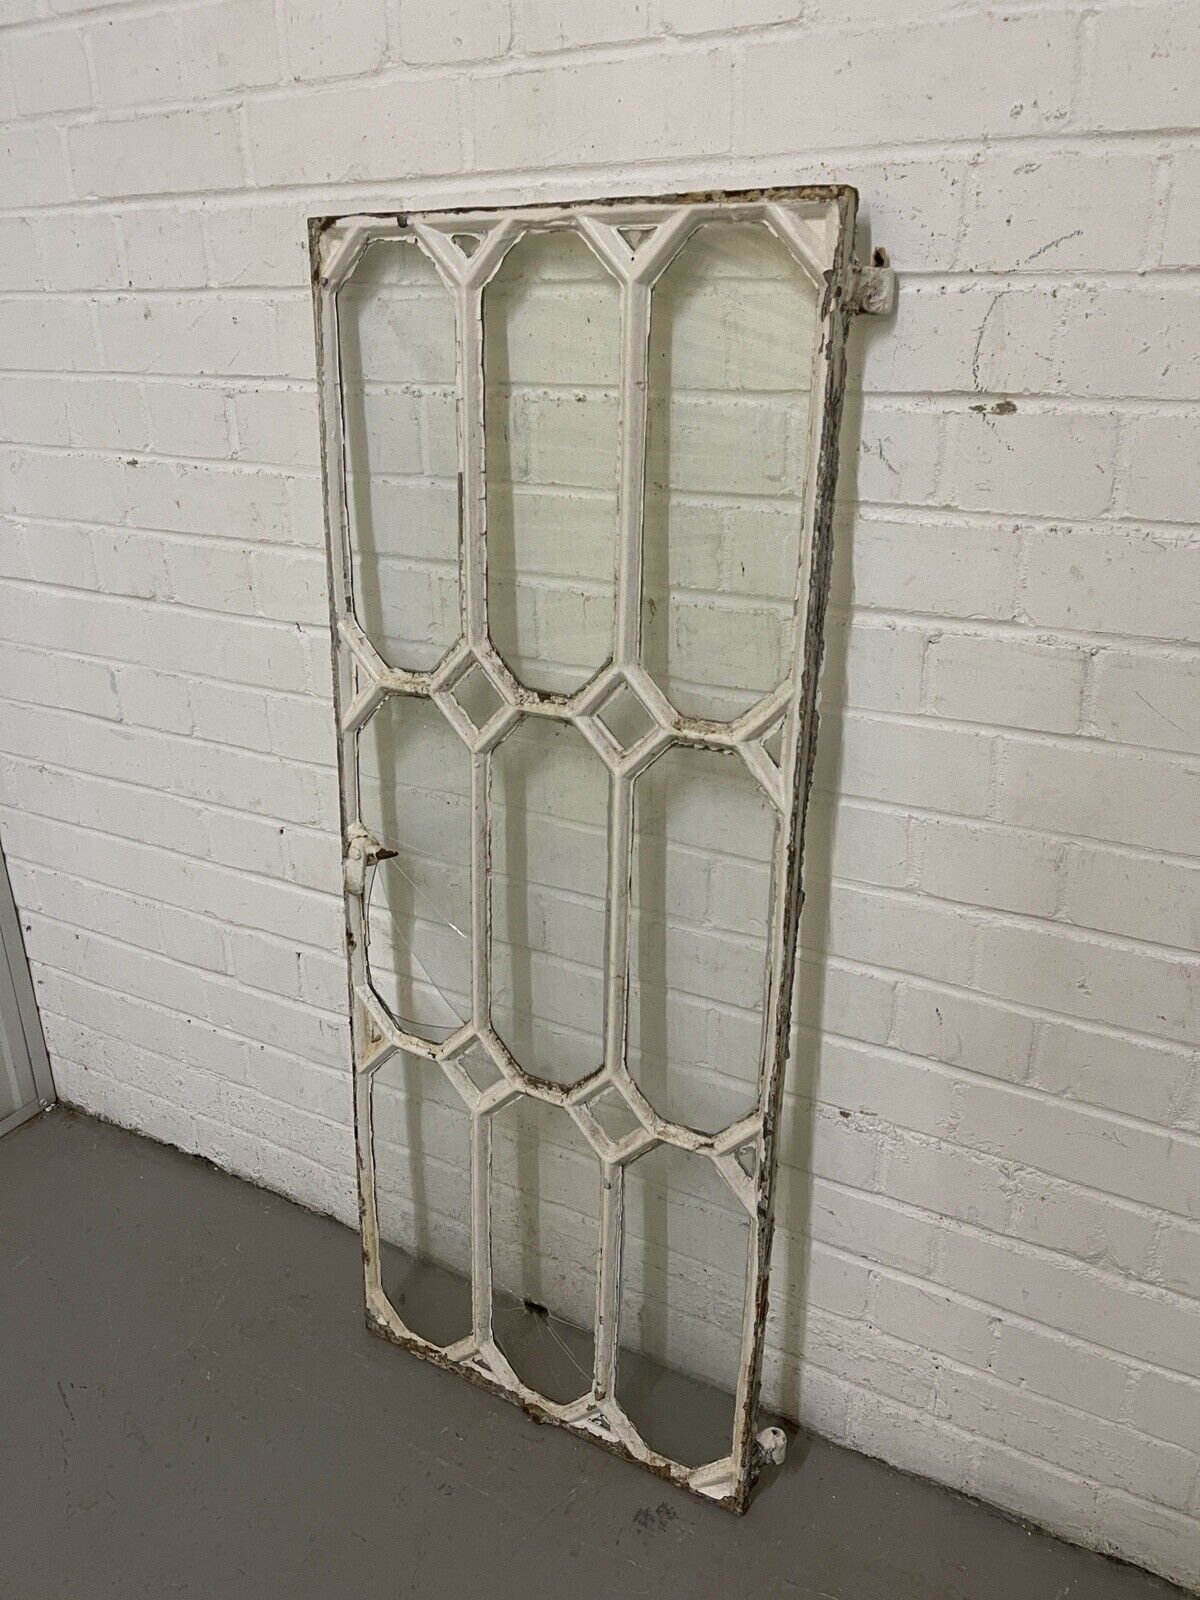 Reclaimed Art and Crafts Cast Iron Crittall Crittal Windows 1135 x 465mm